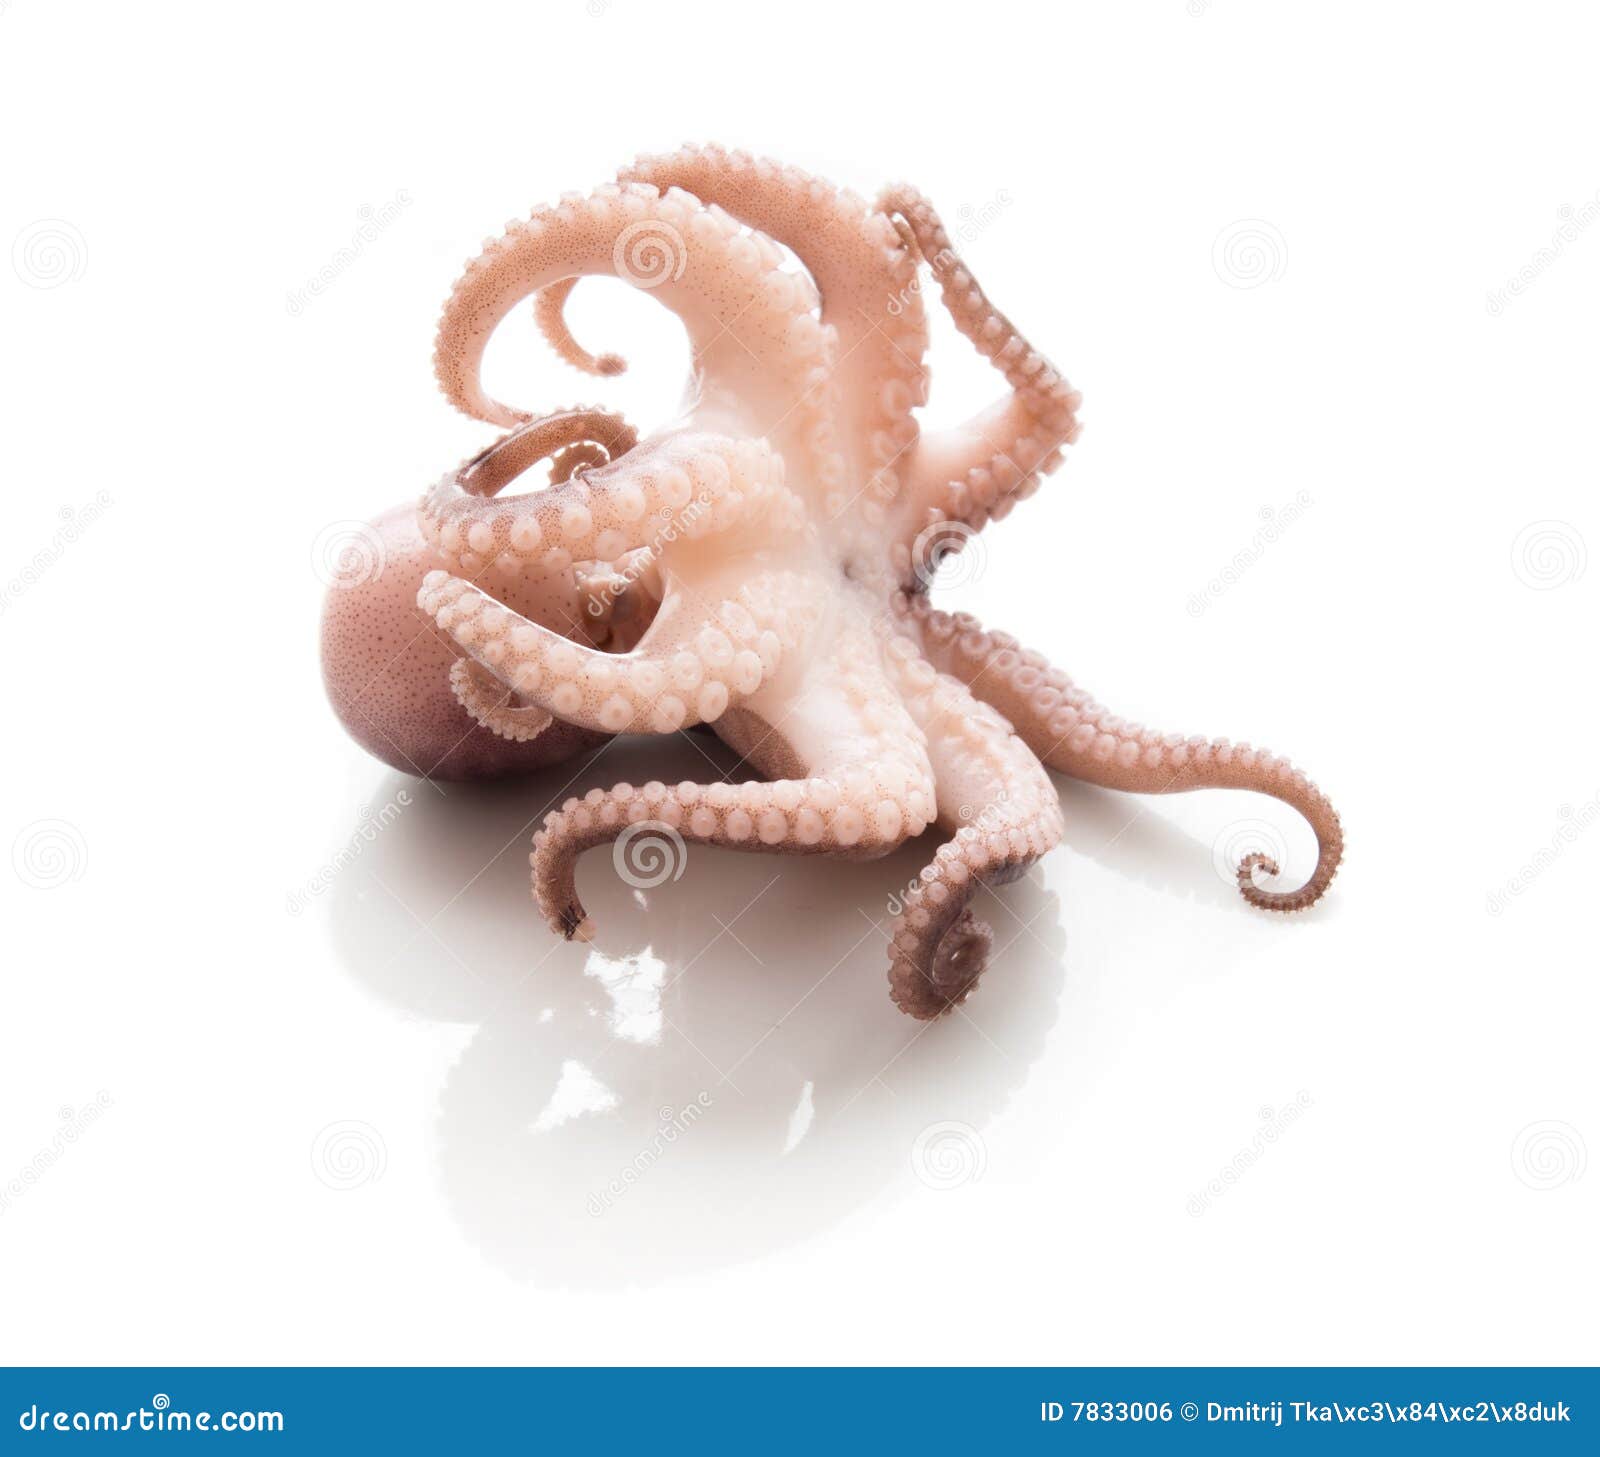 over a small octopus